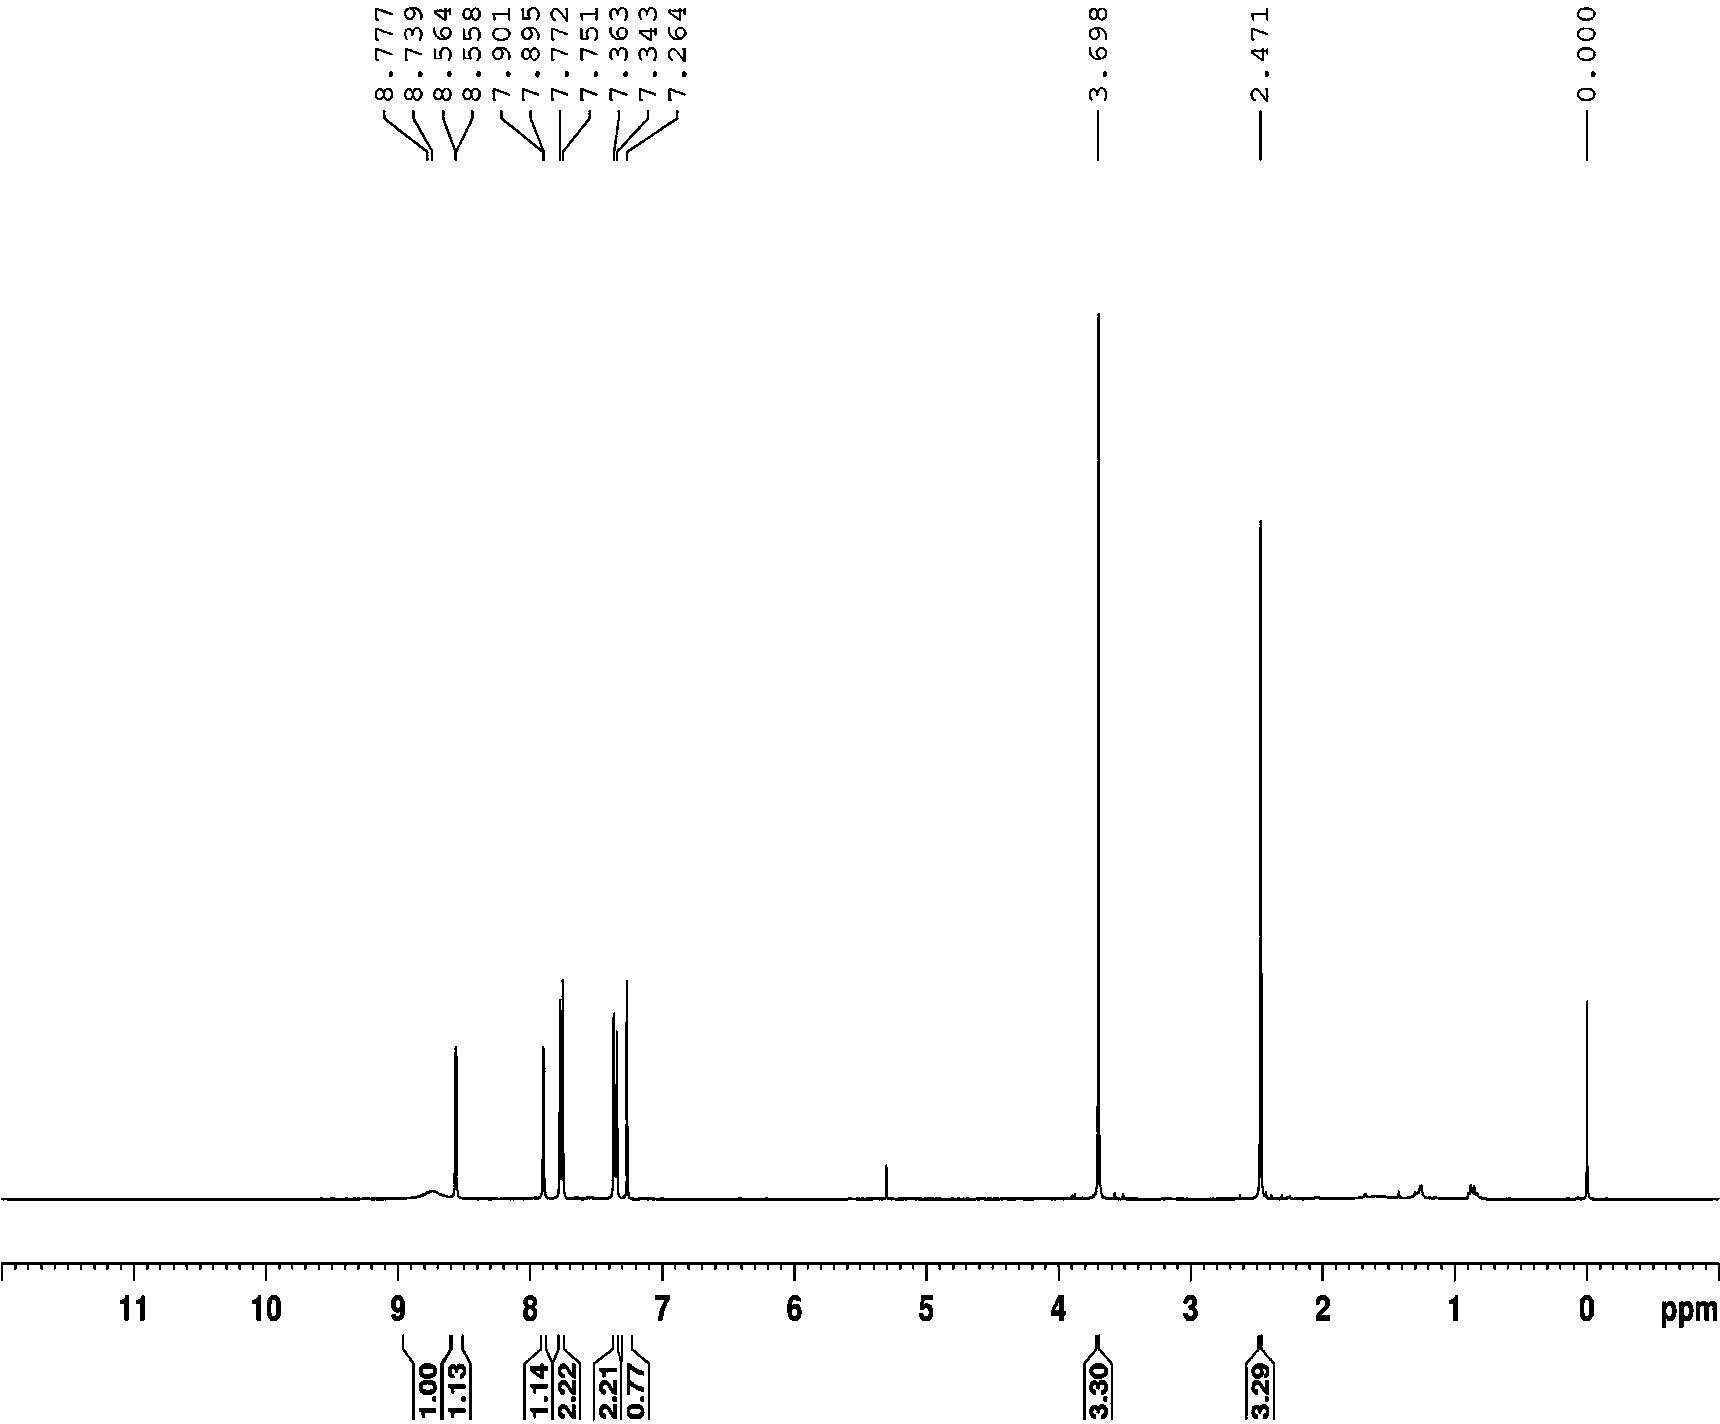 Synthesis method of substituted nitroaniline